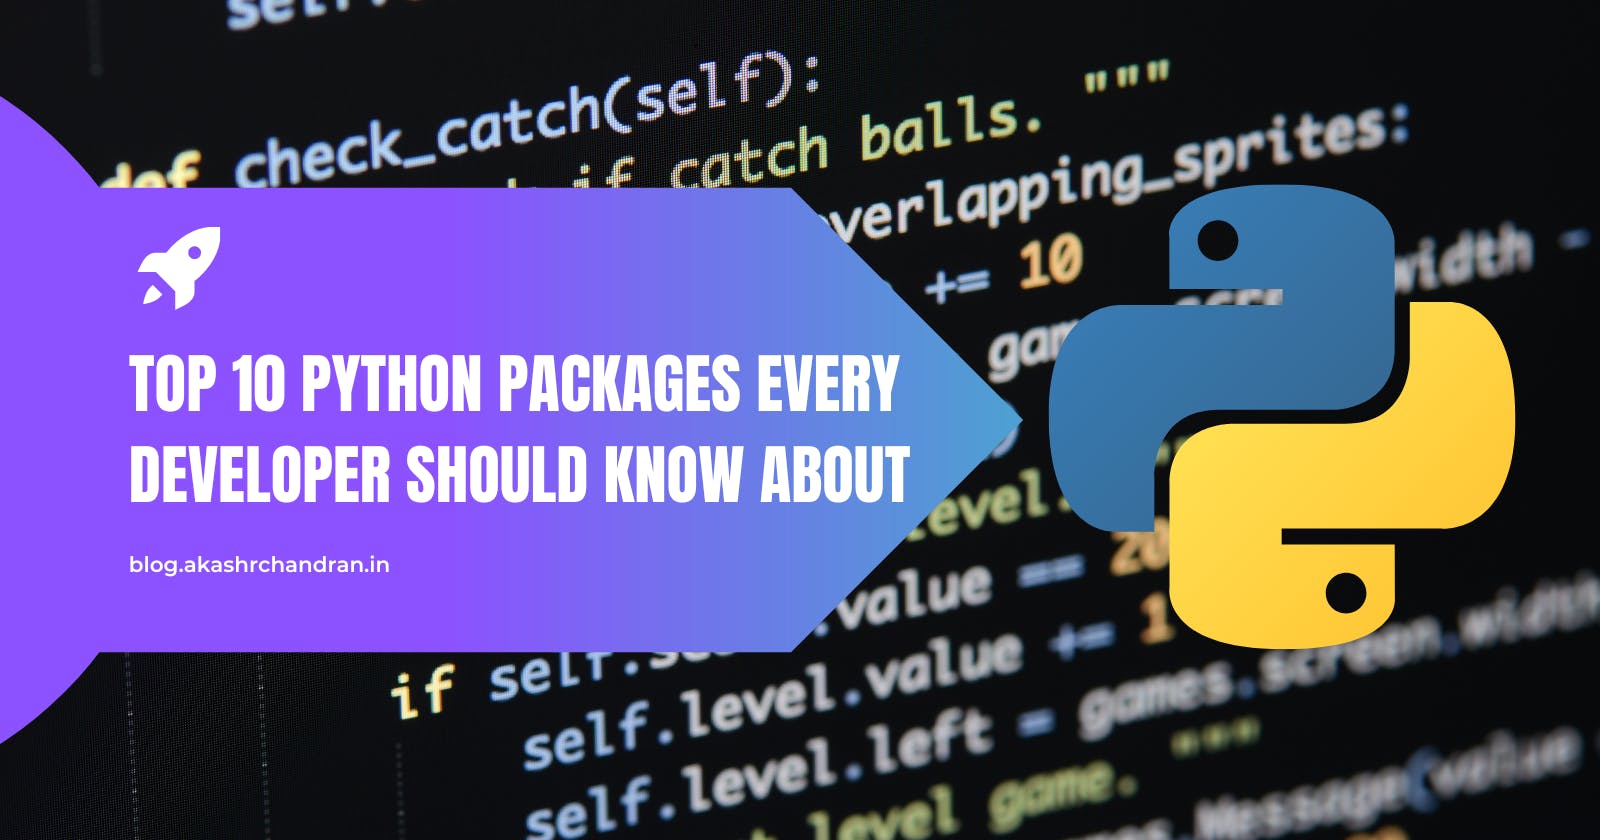 Top 10 Python Packages Every Developer Should Know About